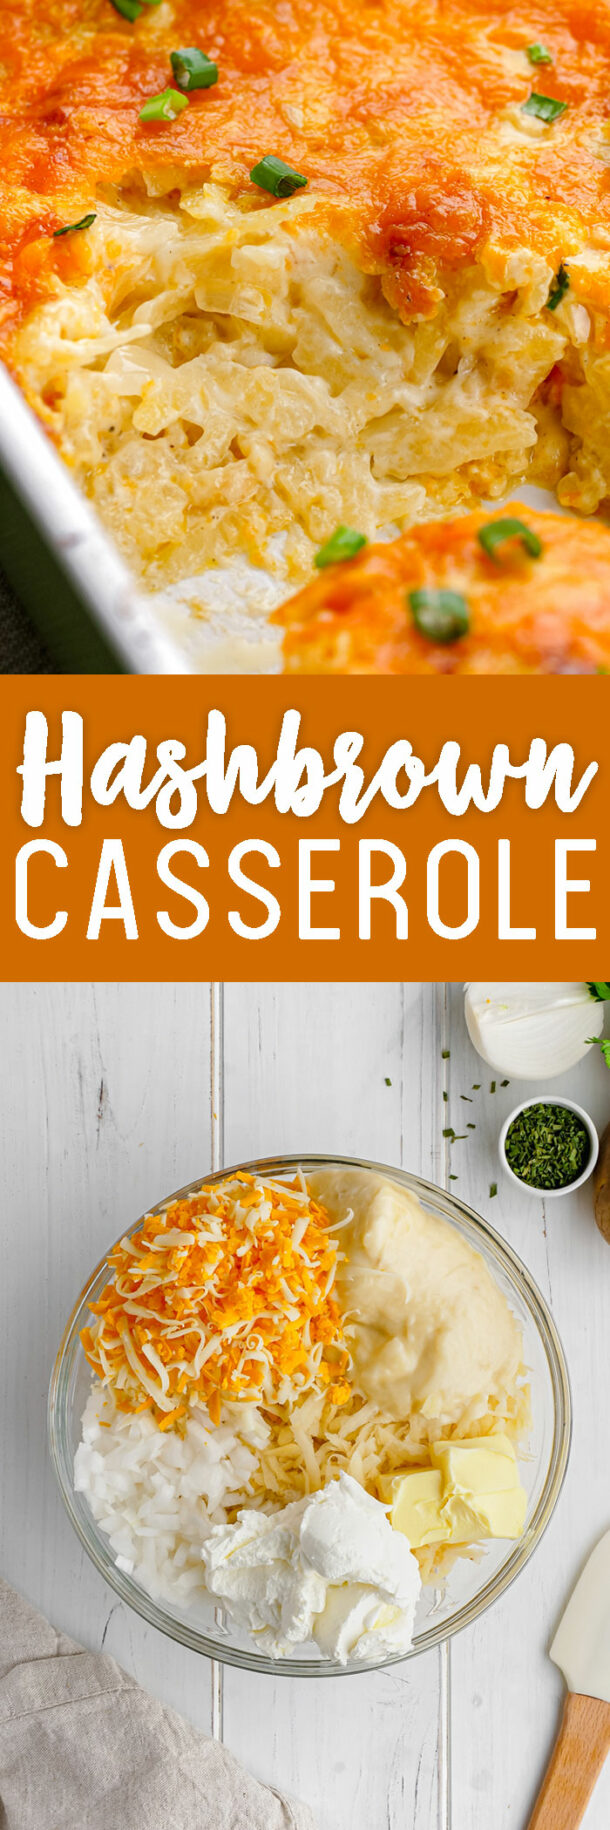 Hashbrown Casserole - Easy Peasy Meals